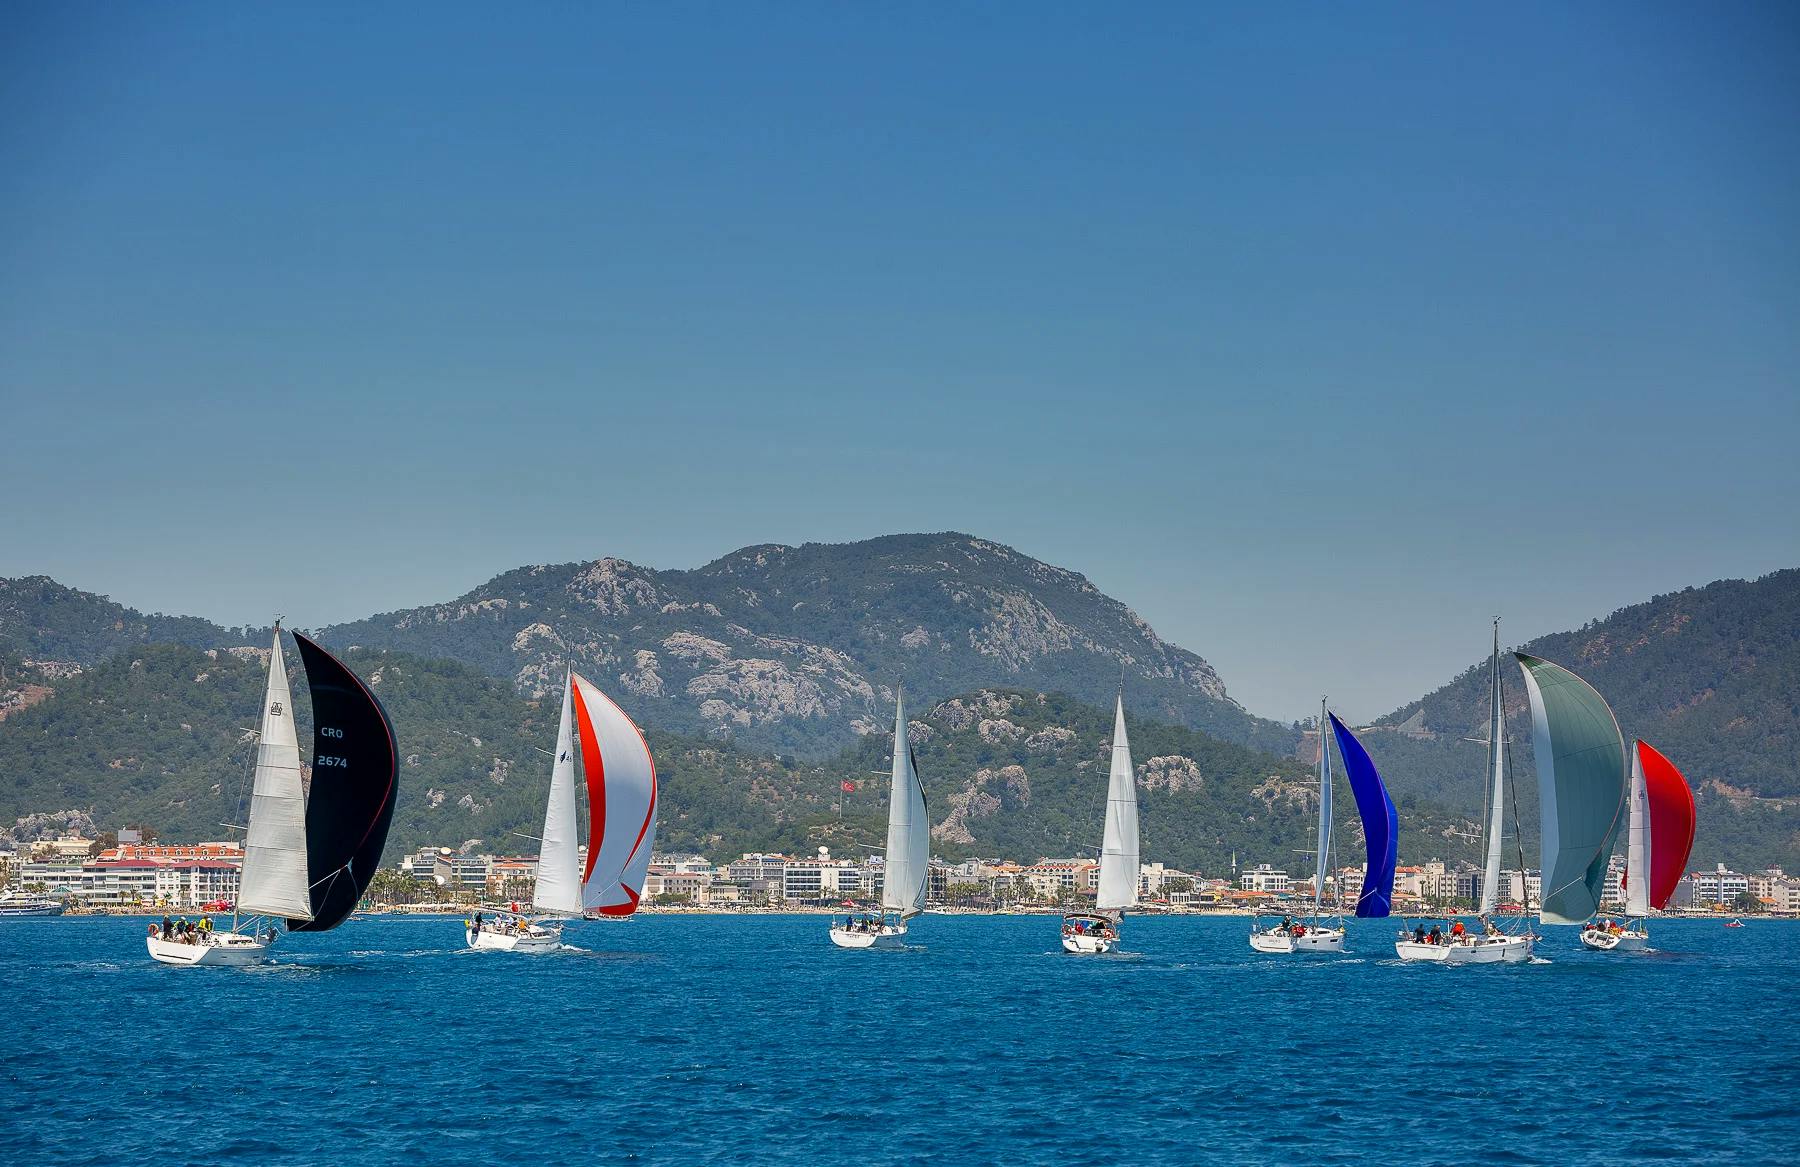 Marmaris Race Week 2024. undefined. International regatta organized by the Marmaris Yacht Club. Join the team, compete with us!